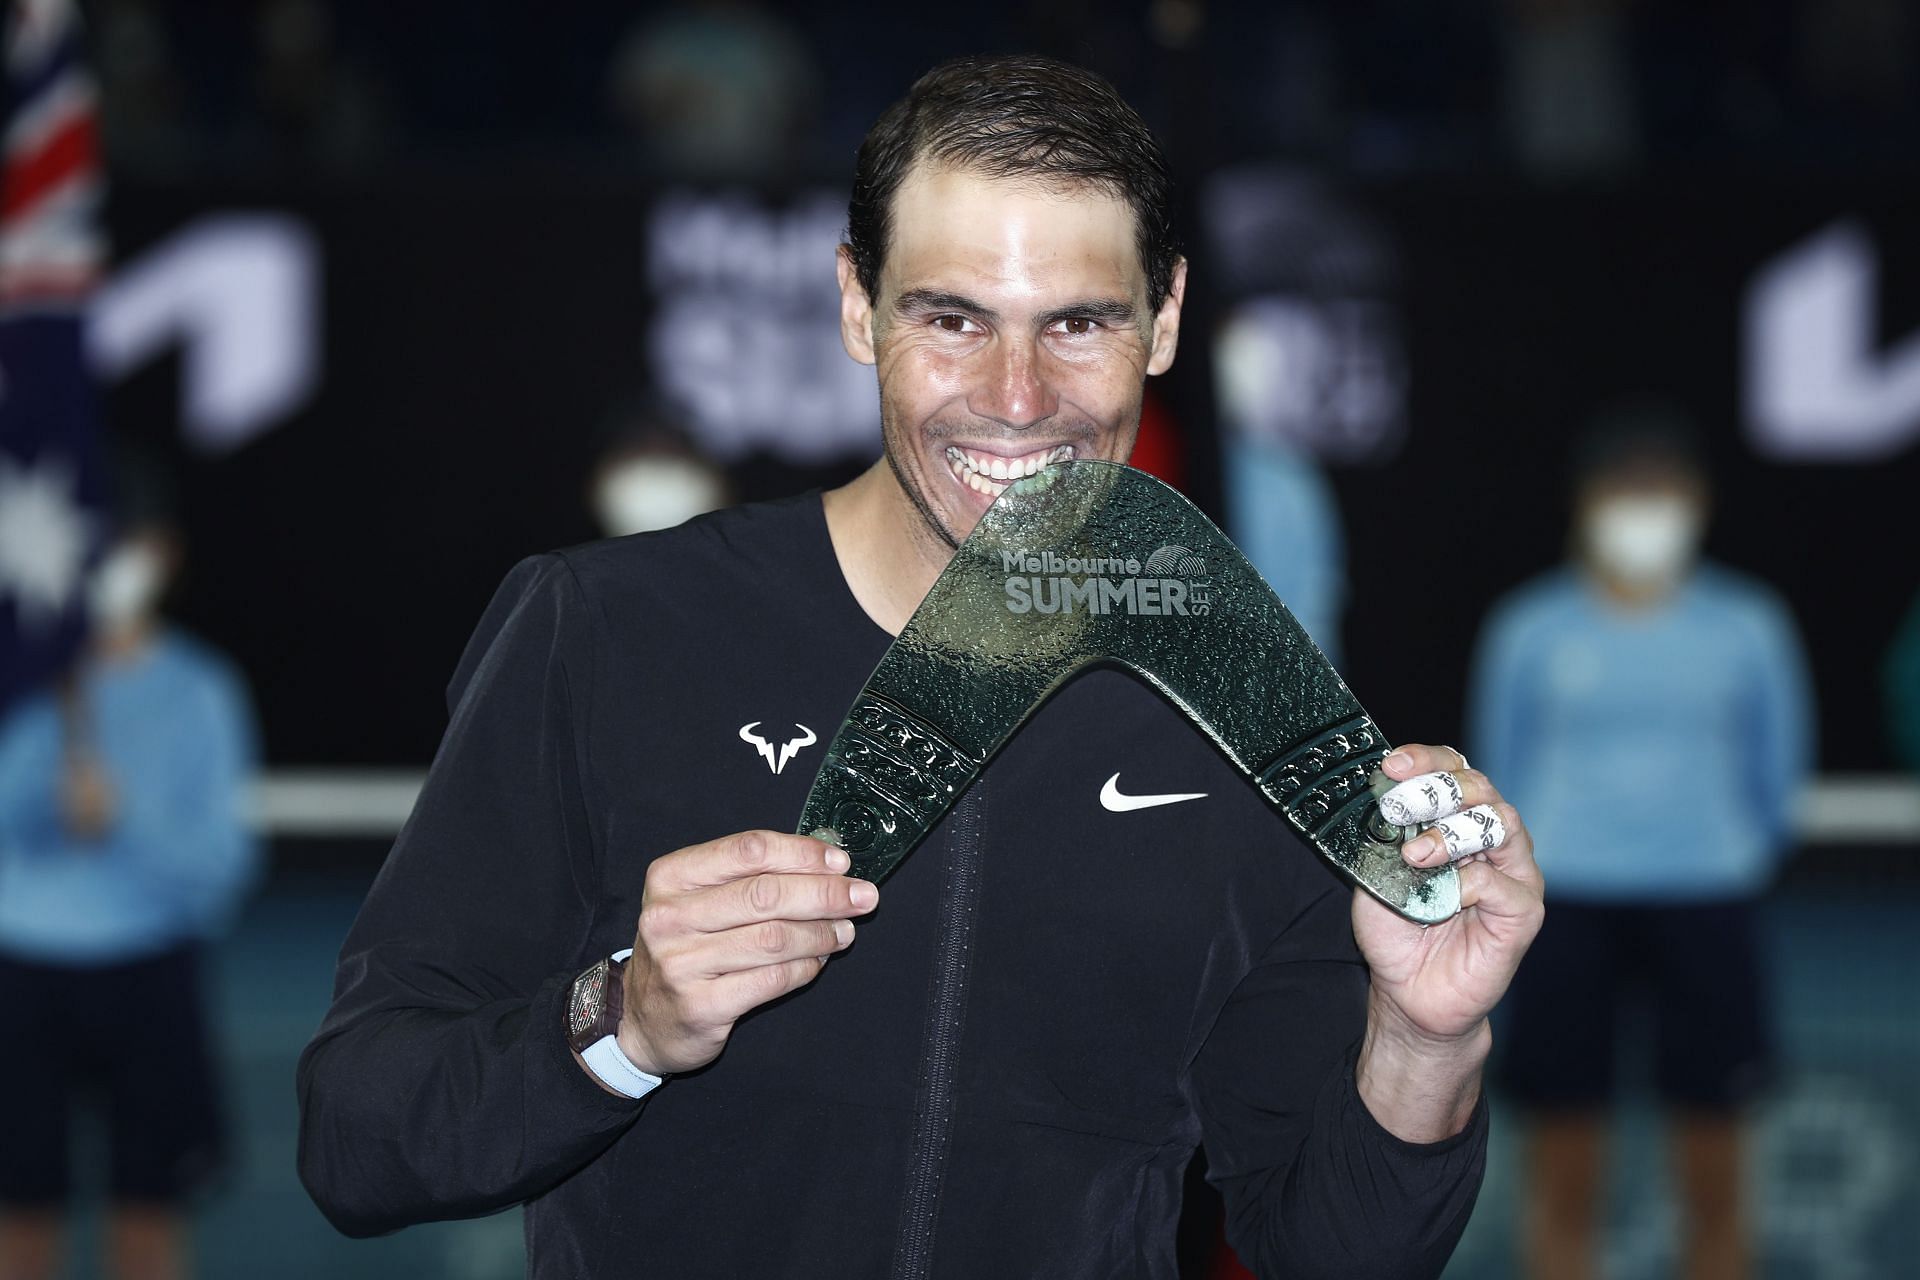 Rafael Nadal with the Melbourne Summer Set 2021 title